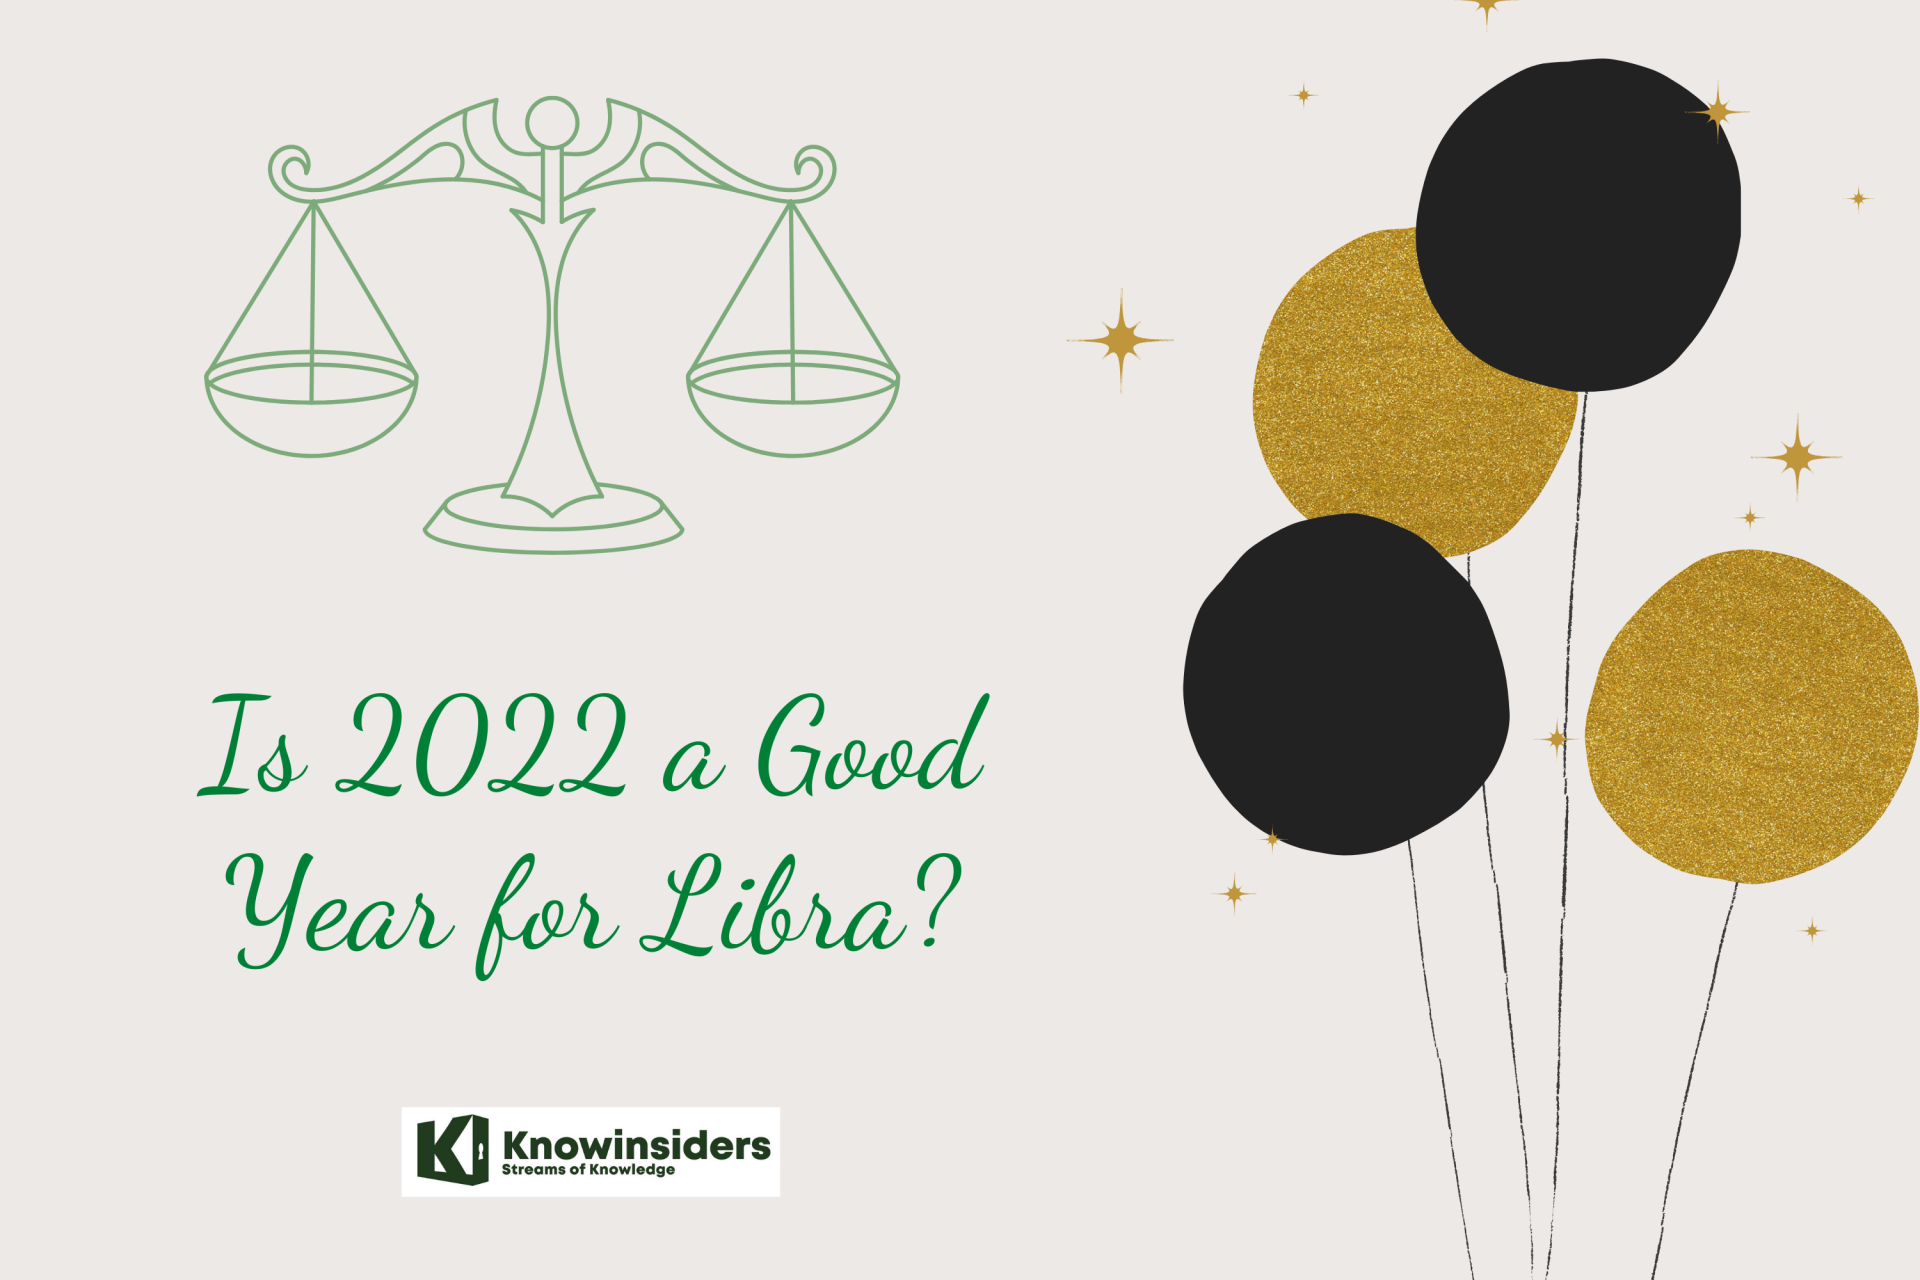 is 2022 a good year for libra